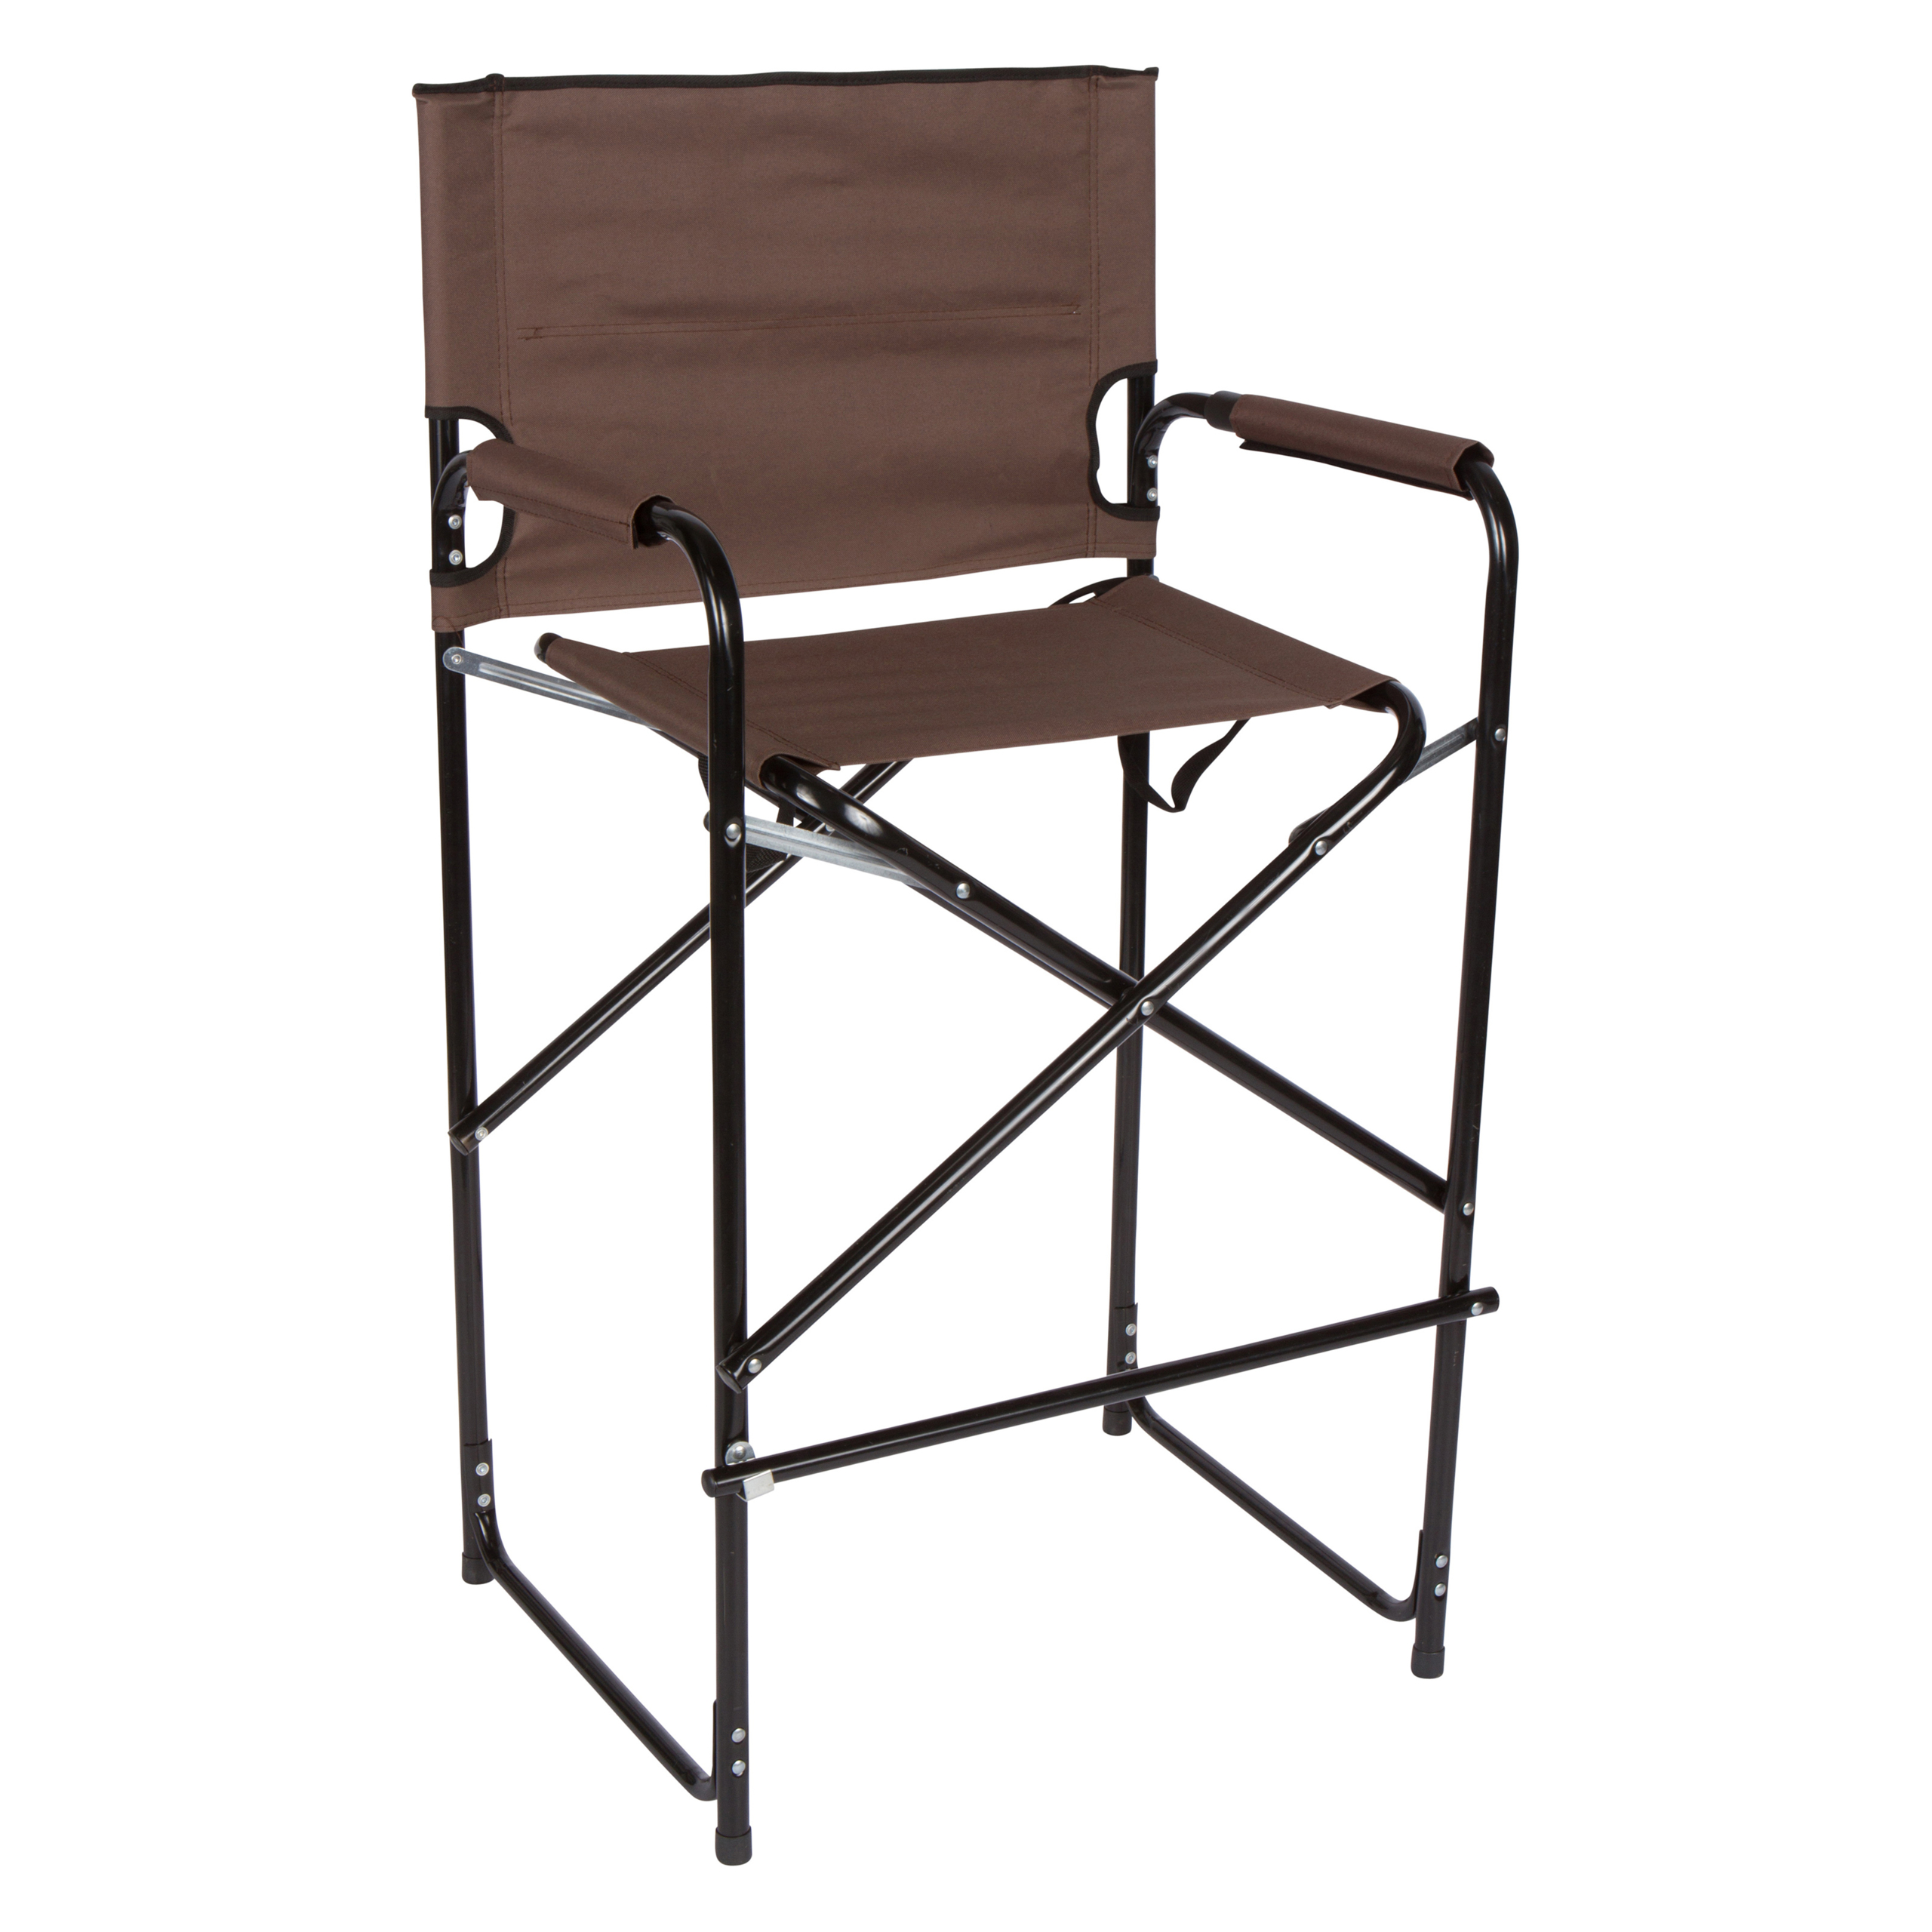 Lightweight and durable aluminum folding tall directors chair by